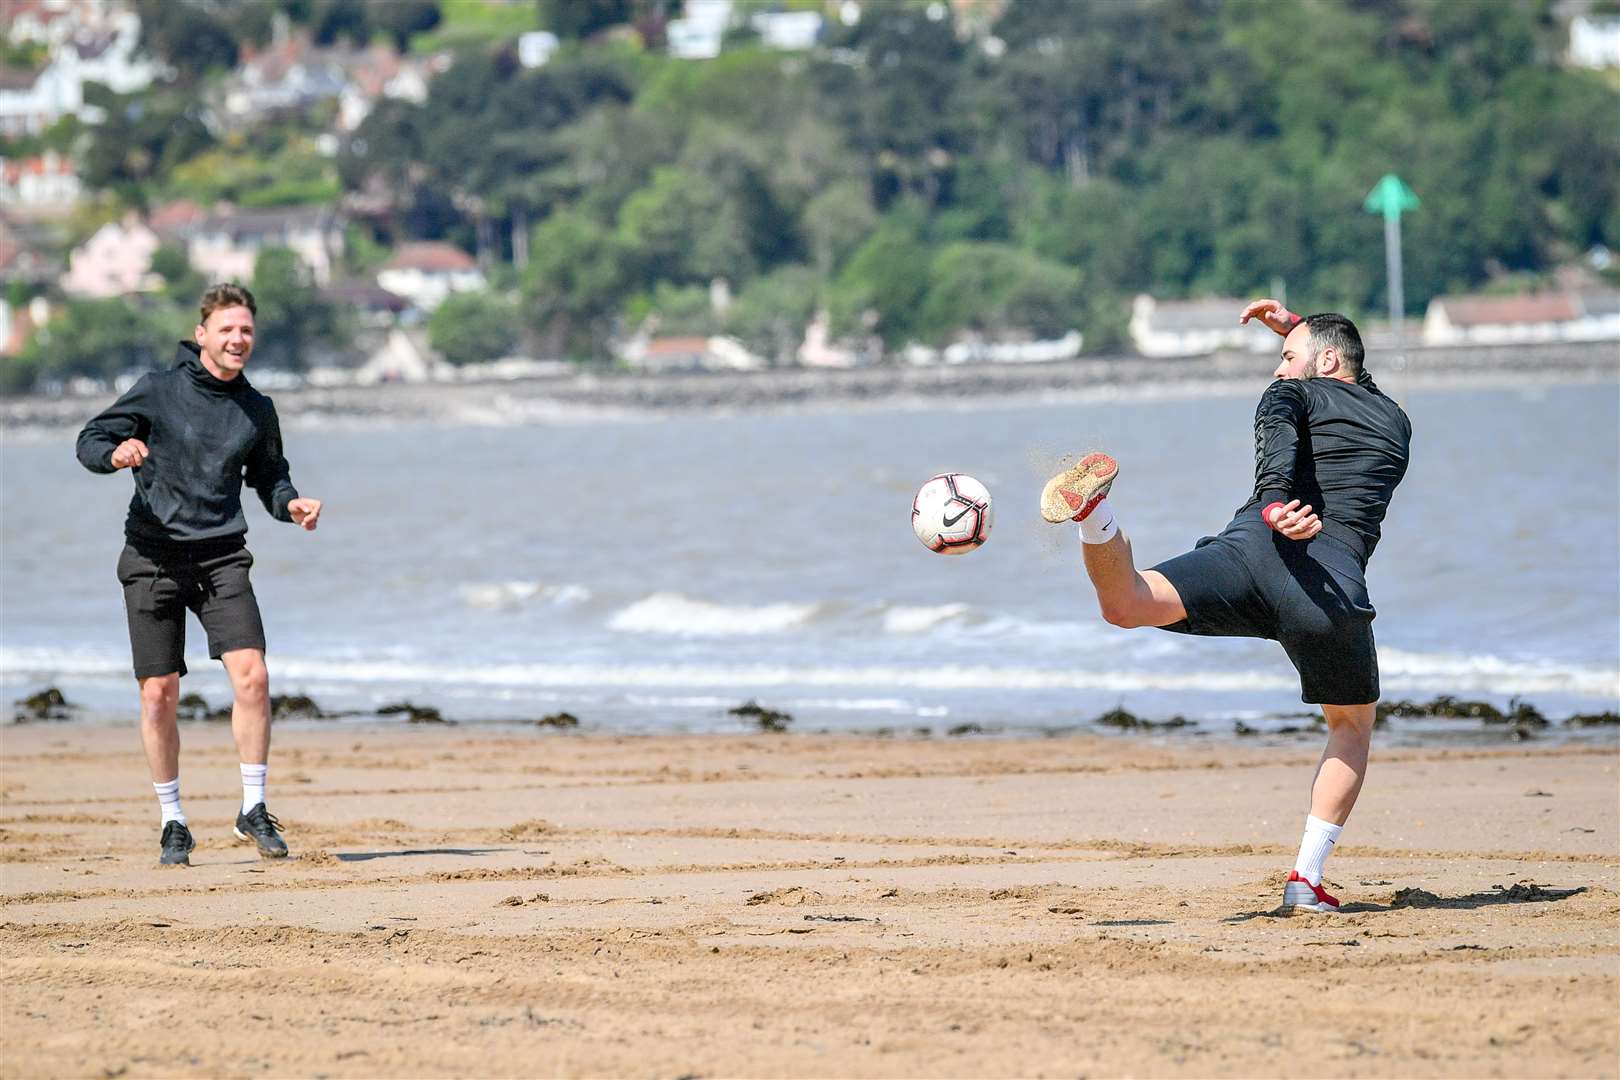 Socially distanced exercise was also in evidence on the beach (Ben Birchall/PA)